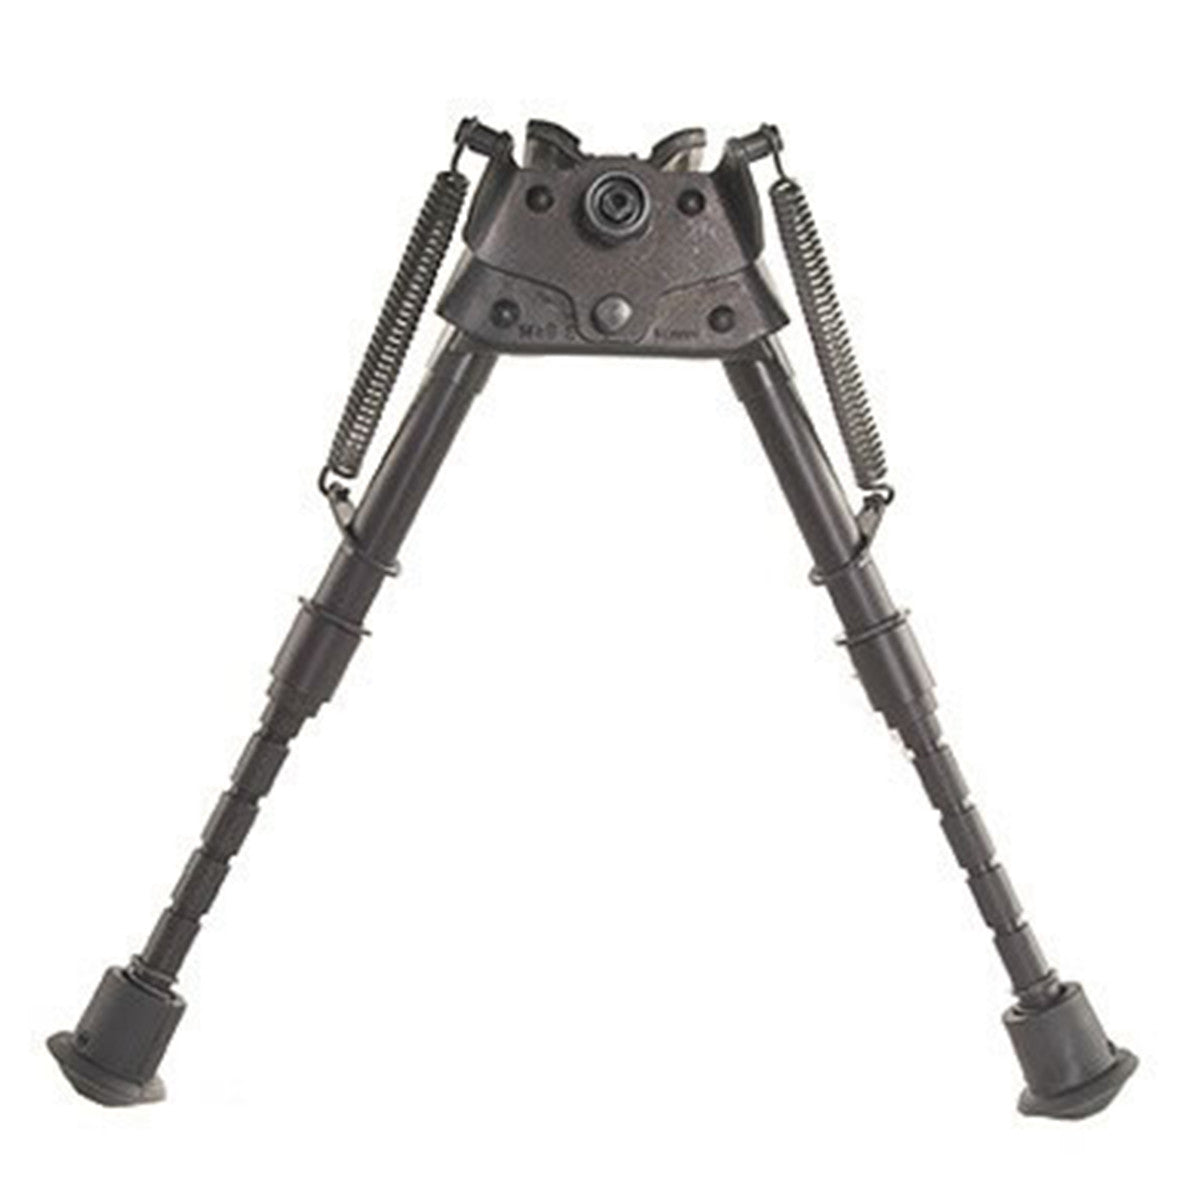 Harris S-BRM 6 to 9 Inch Bipod in Harris S-BRM 6 to 9 Inch Bipod - goHUNT Shop by GOHUNT | Harris Engineering Inc. - GOHUNT Shop